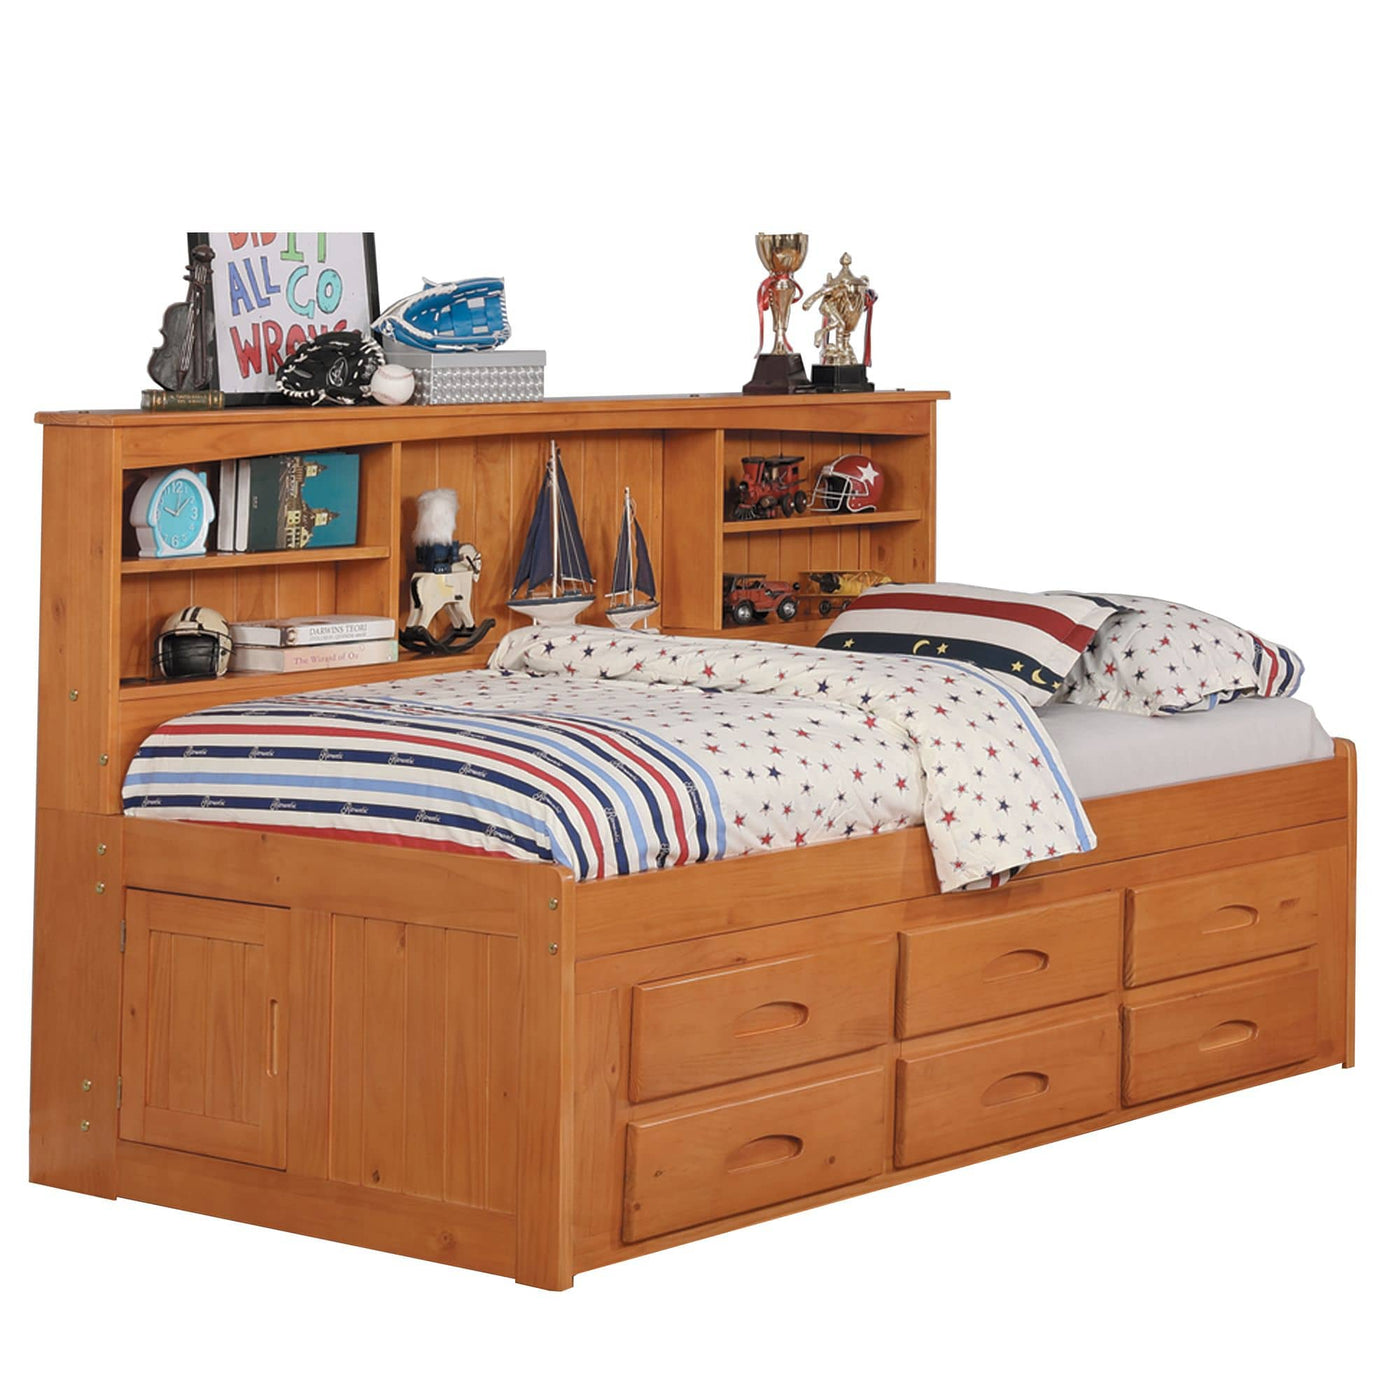 DISCOVERY WORLD FURNITURE HONEY TWIN SIZE BOOKCASE DAY BED Custom Kids Furniture